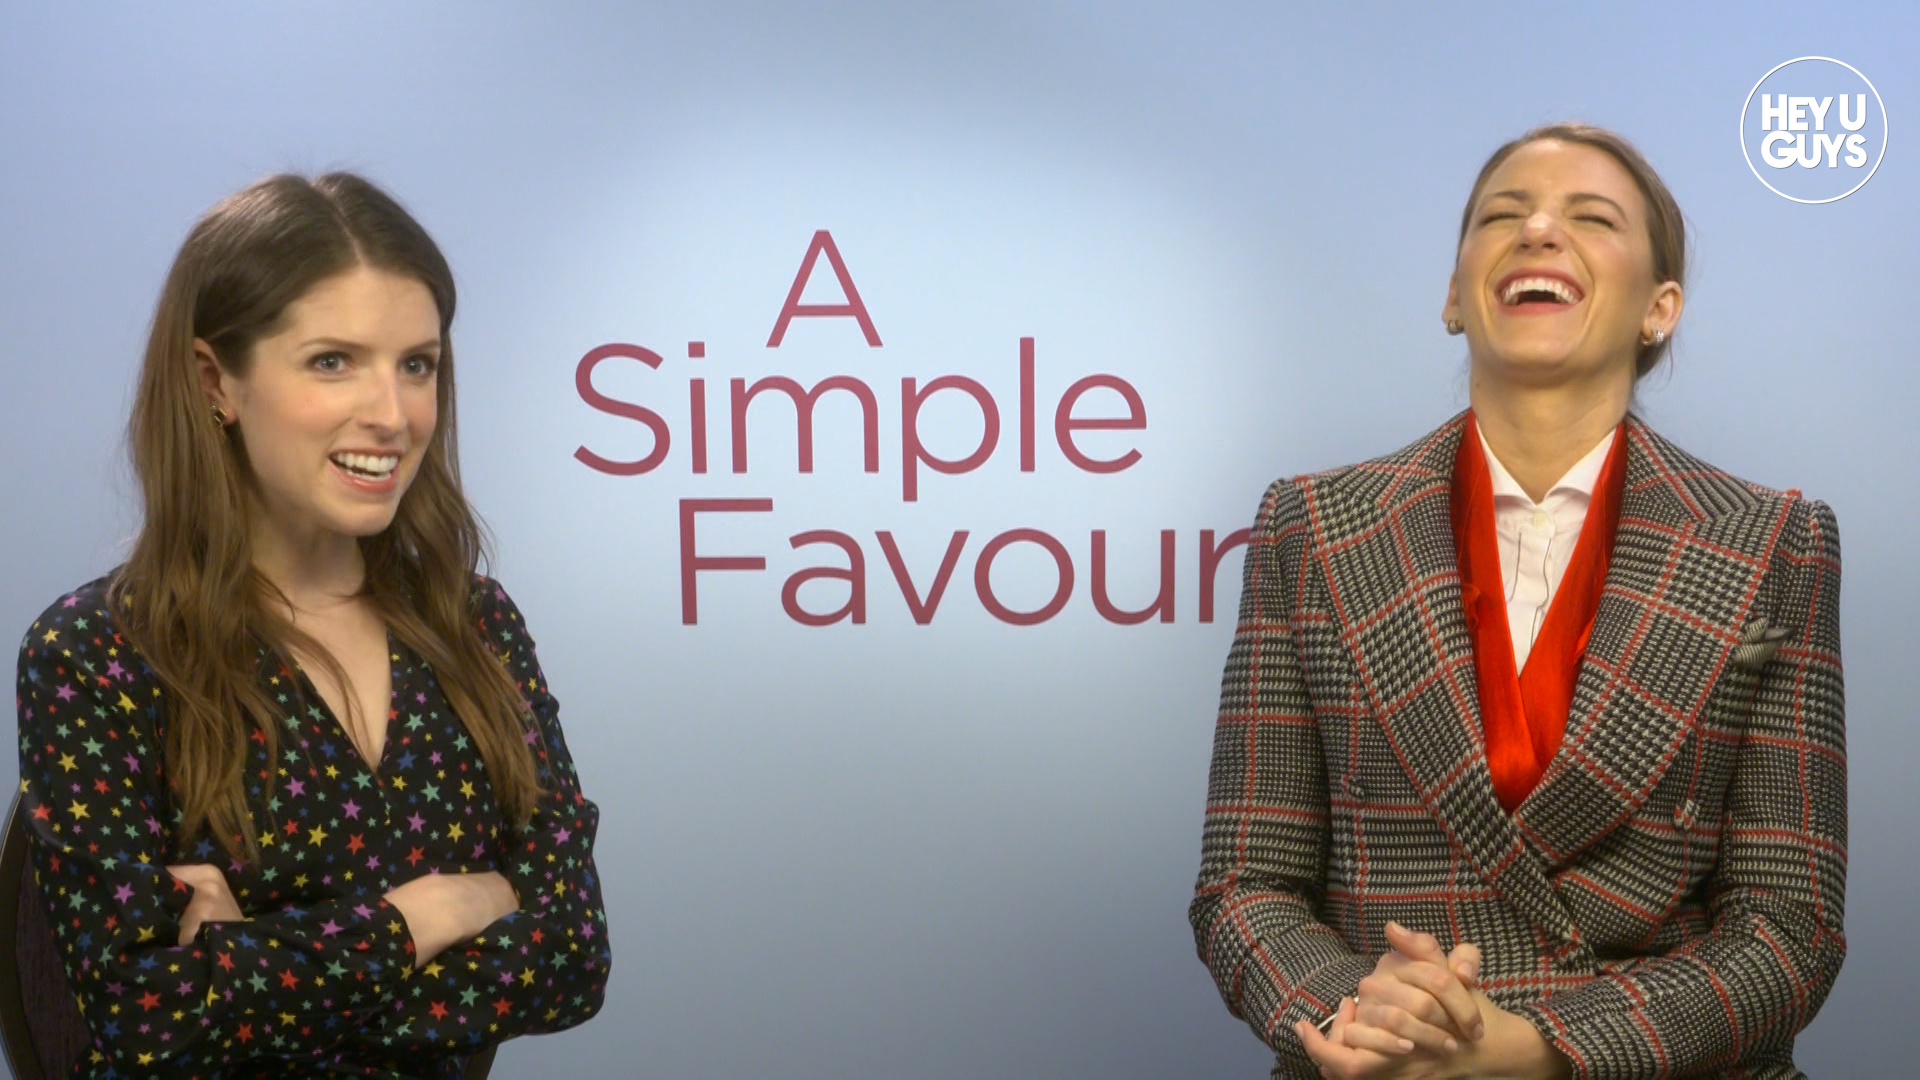 anna kendrick blake lively a simple favour interview